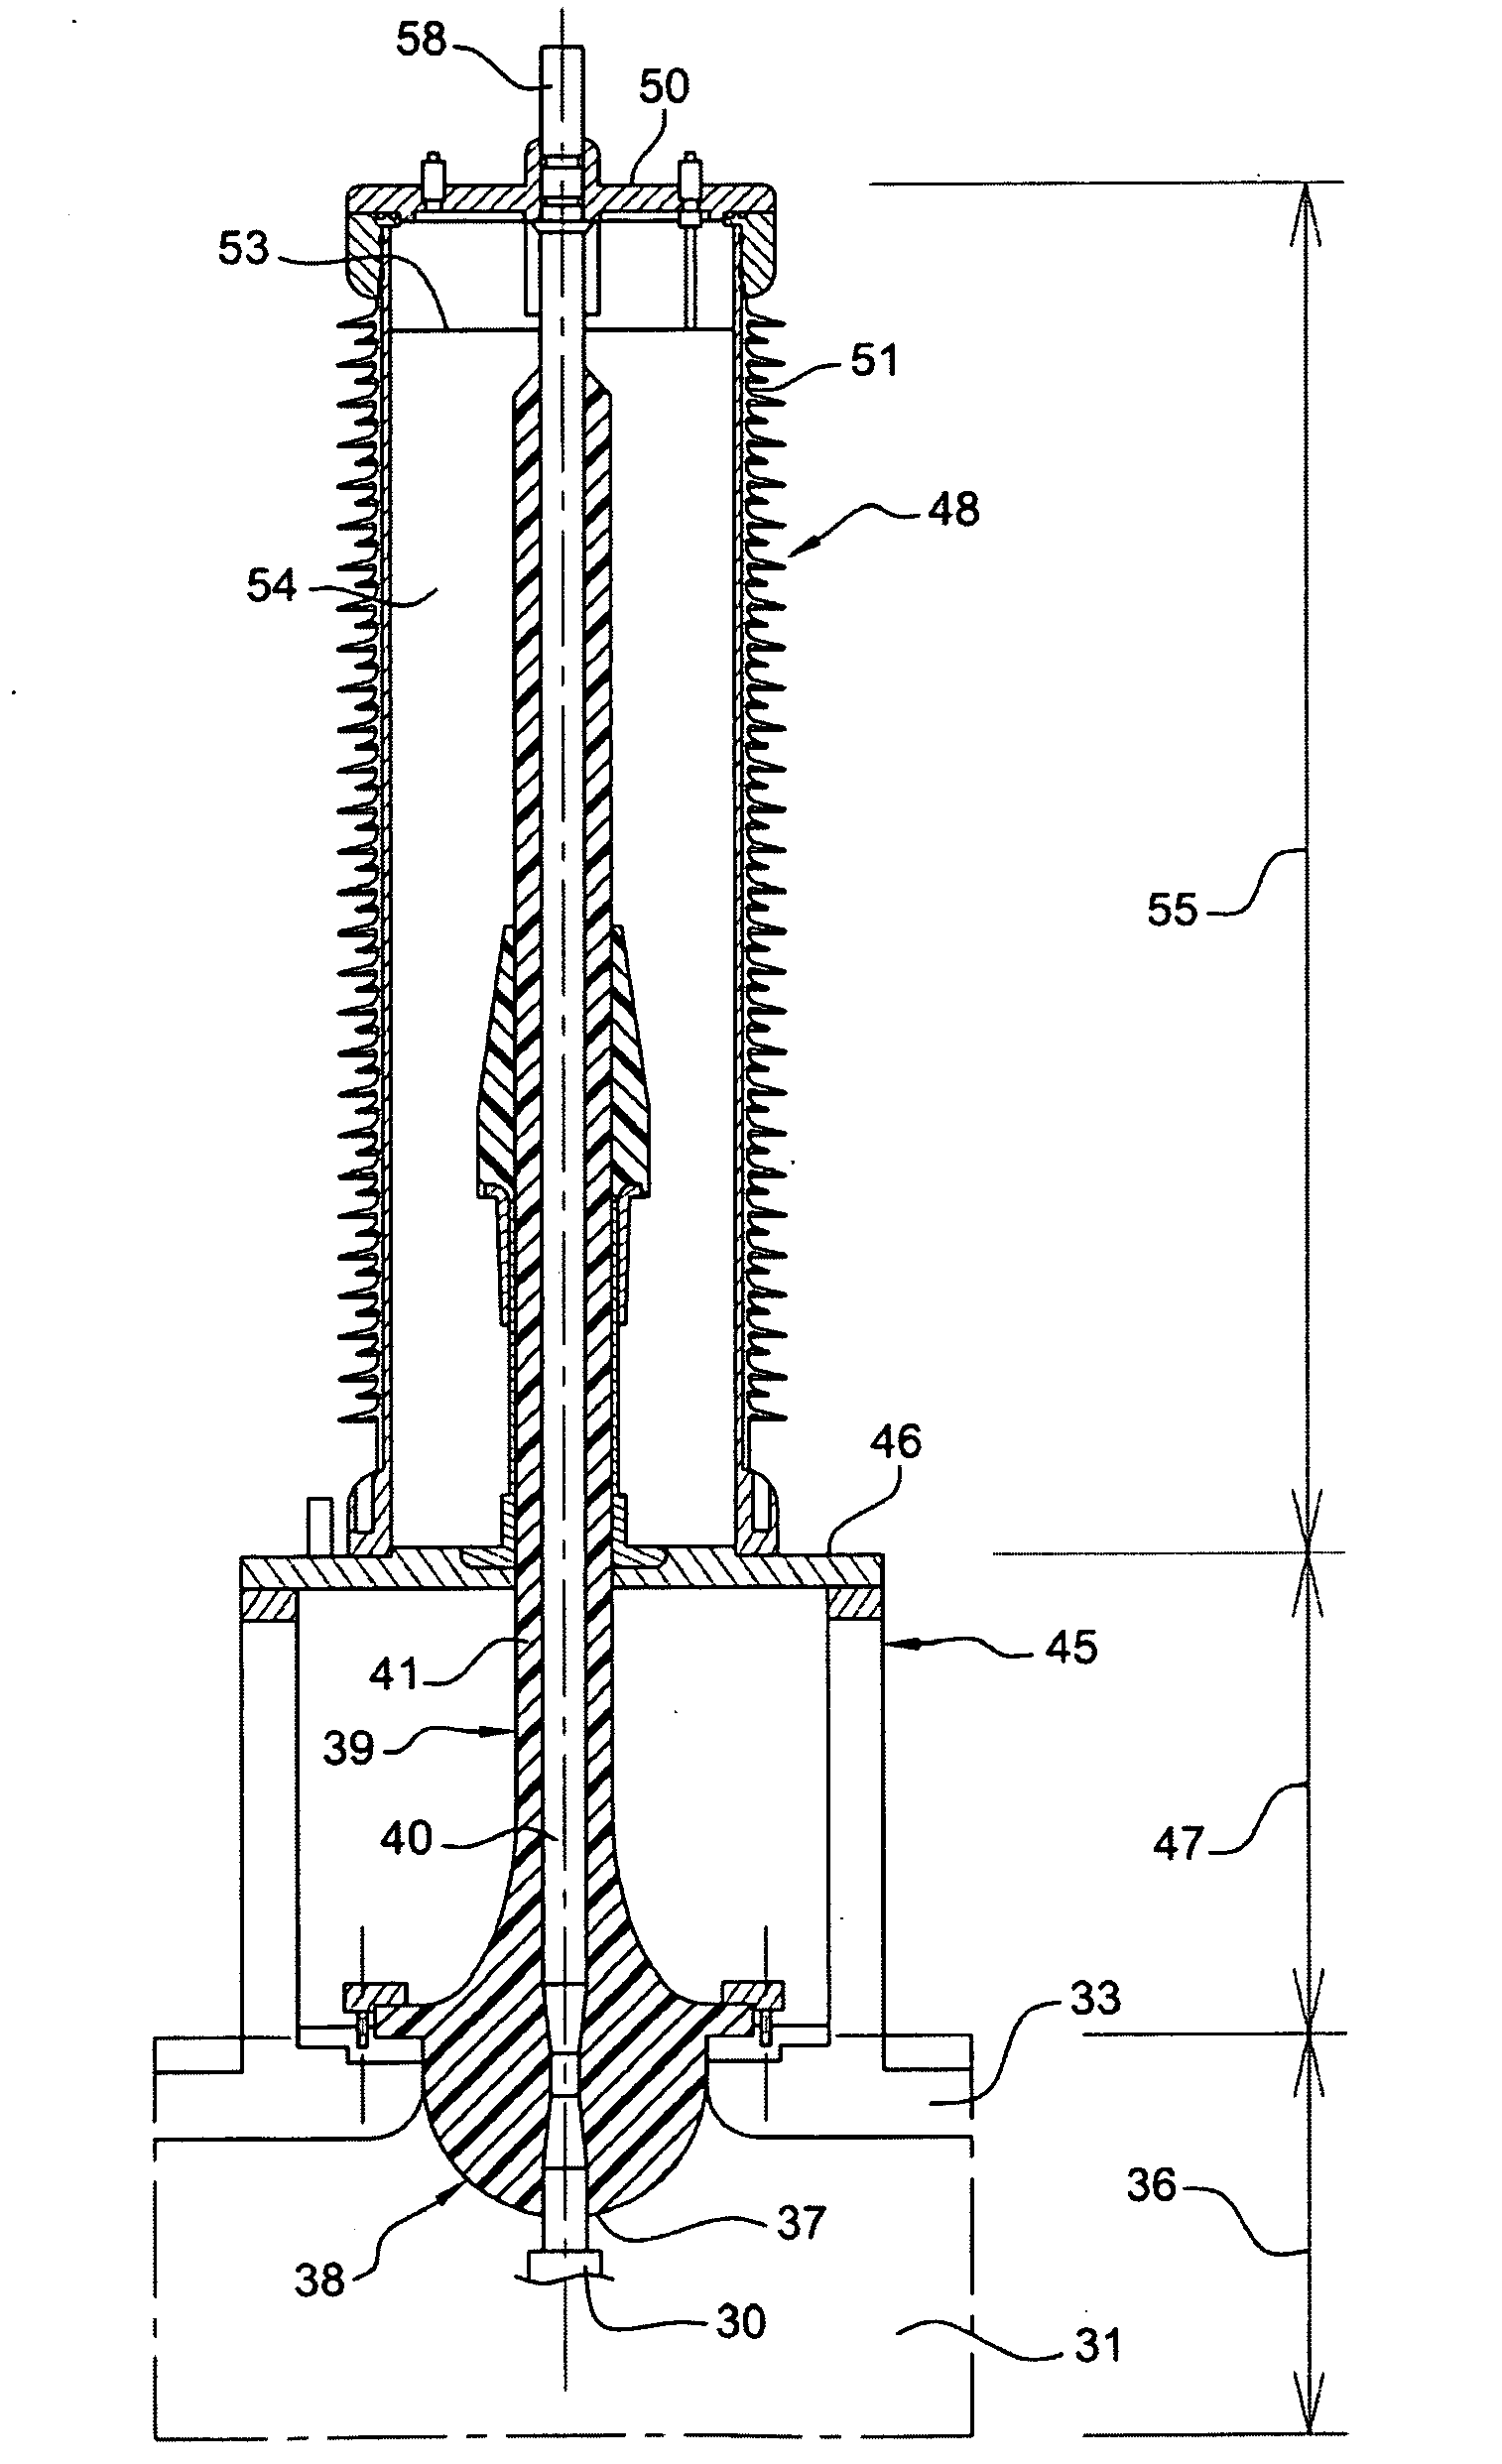 Electrical connection structure for a superconductive element